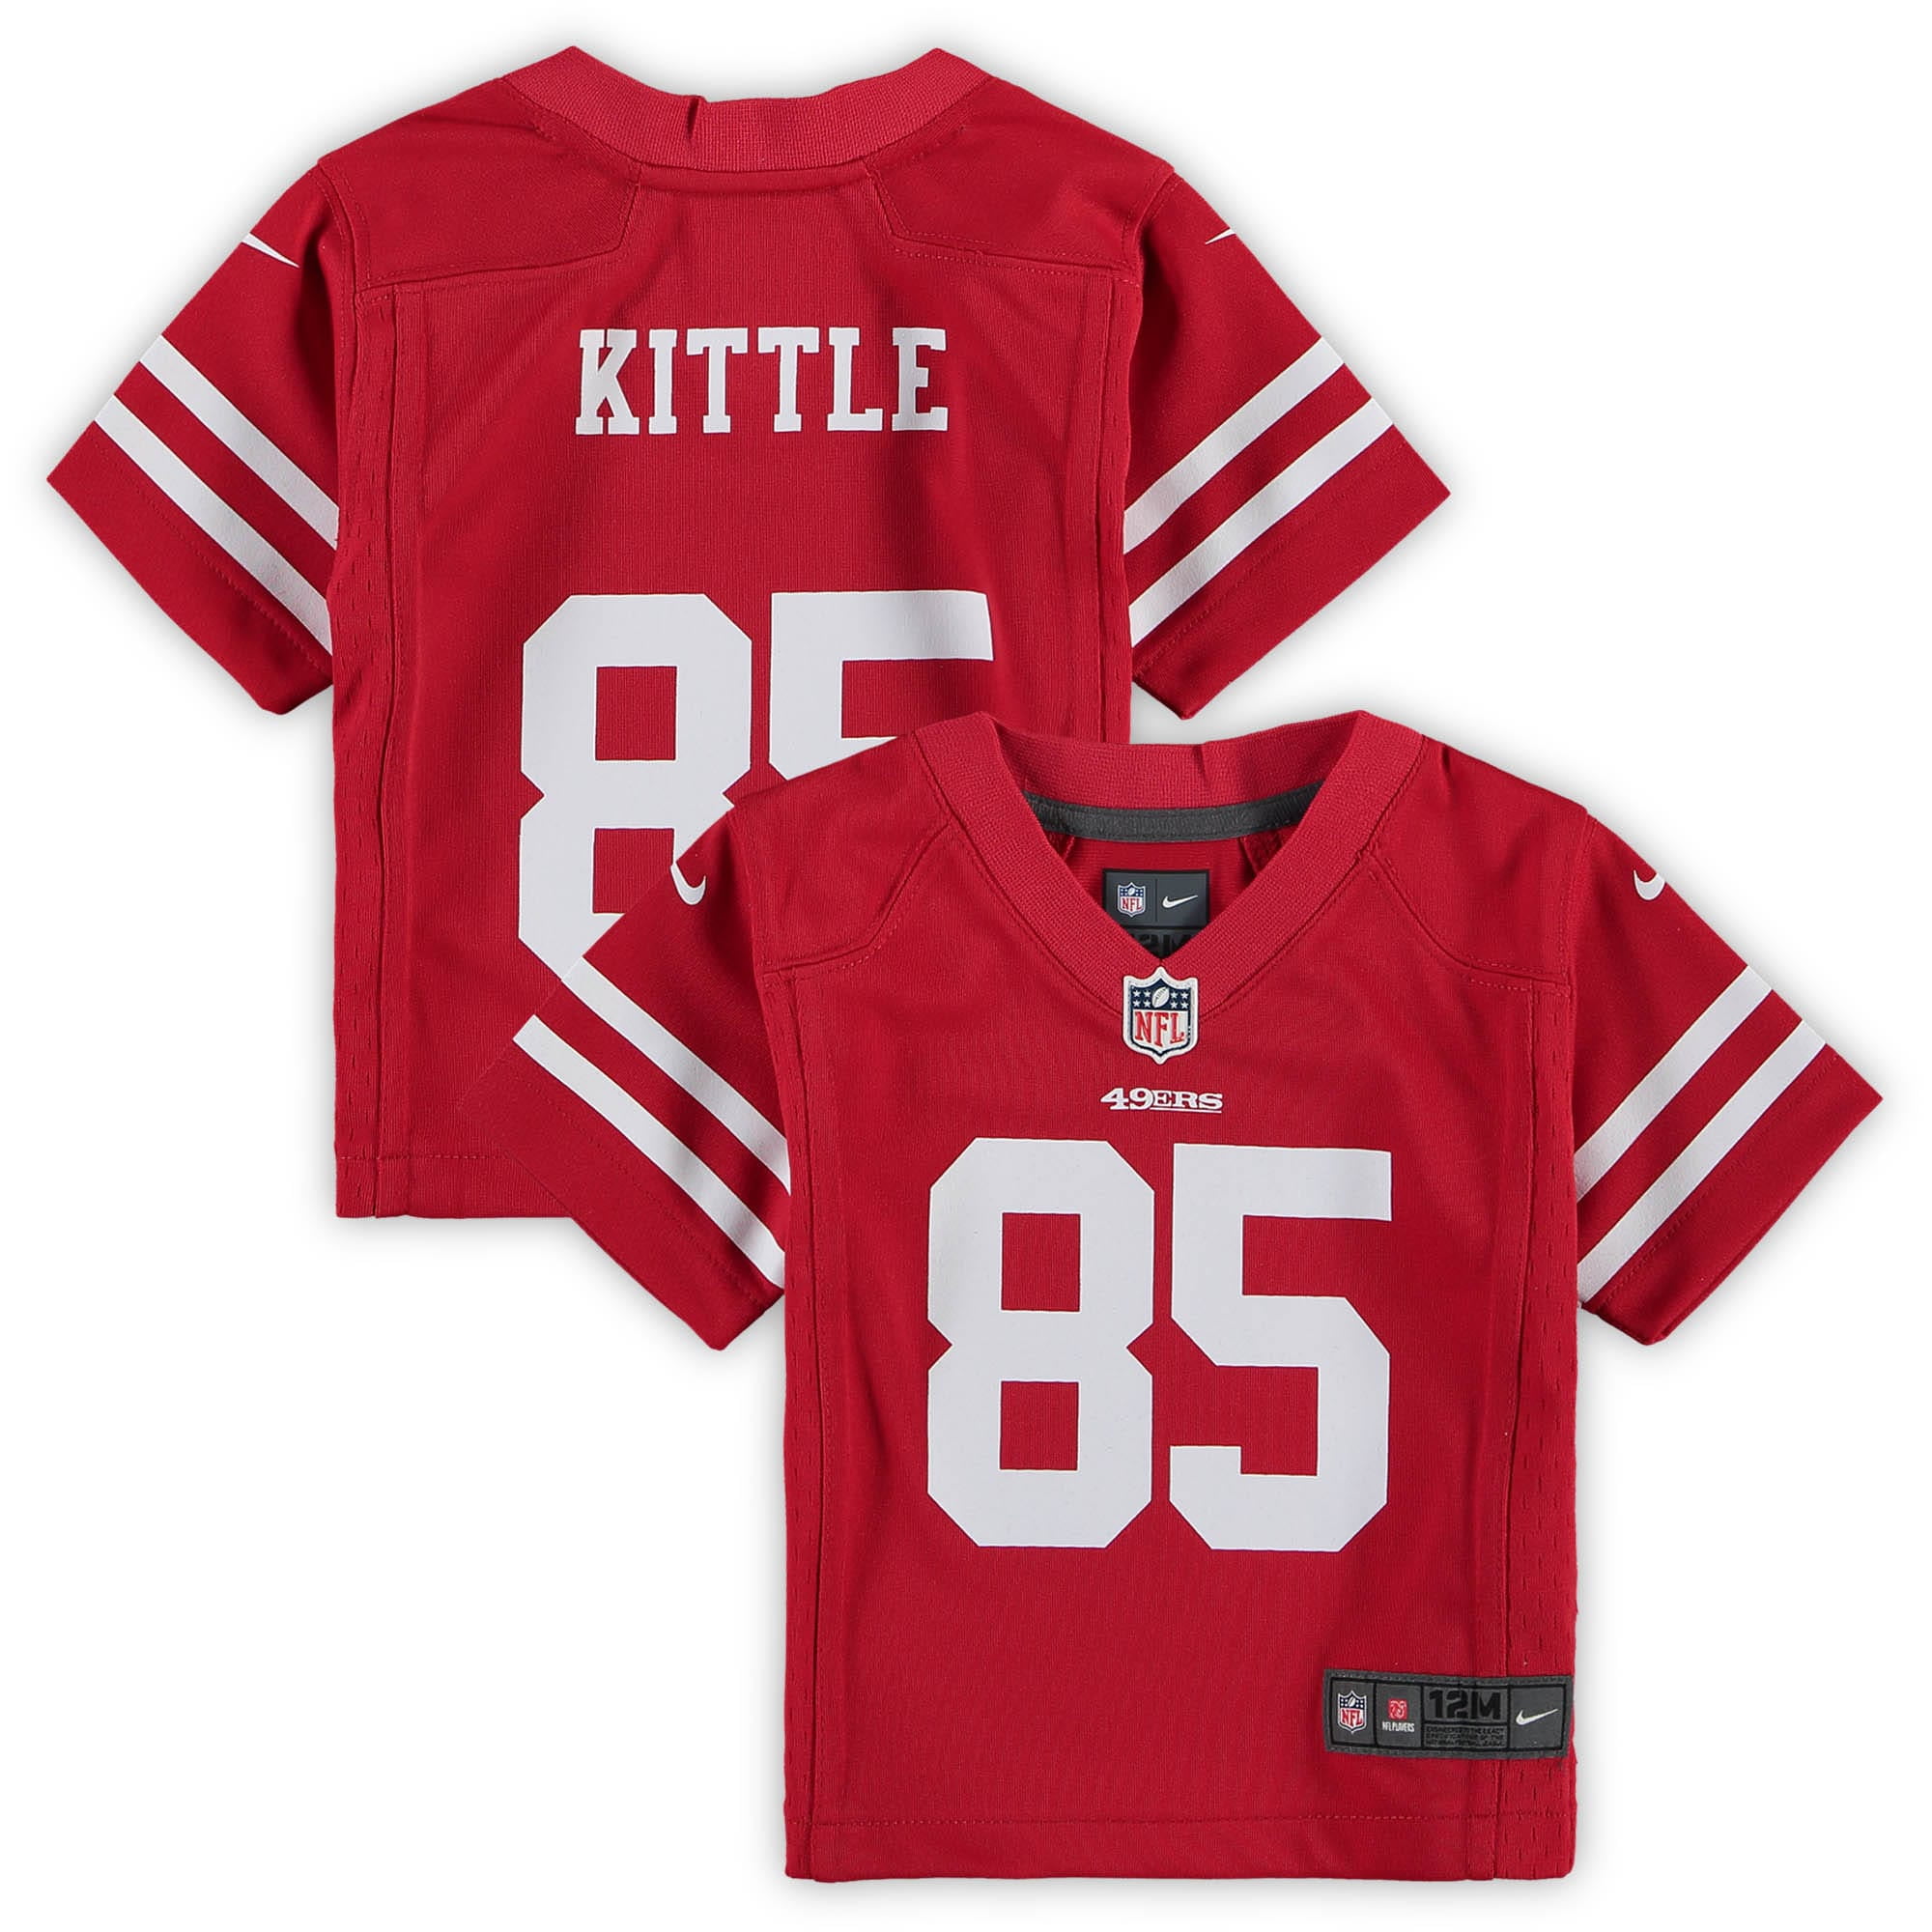 george kittle game jersey